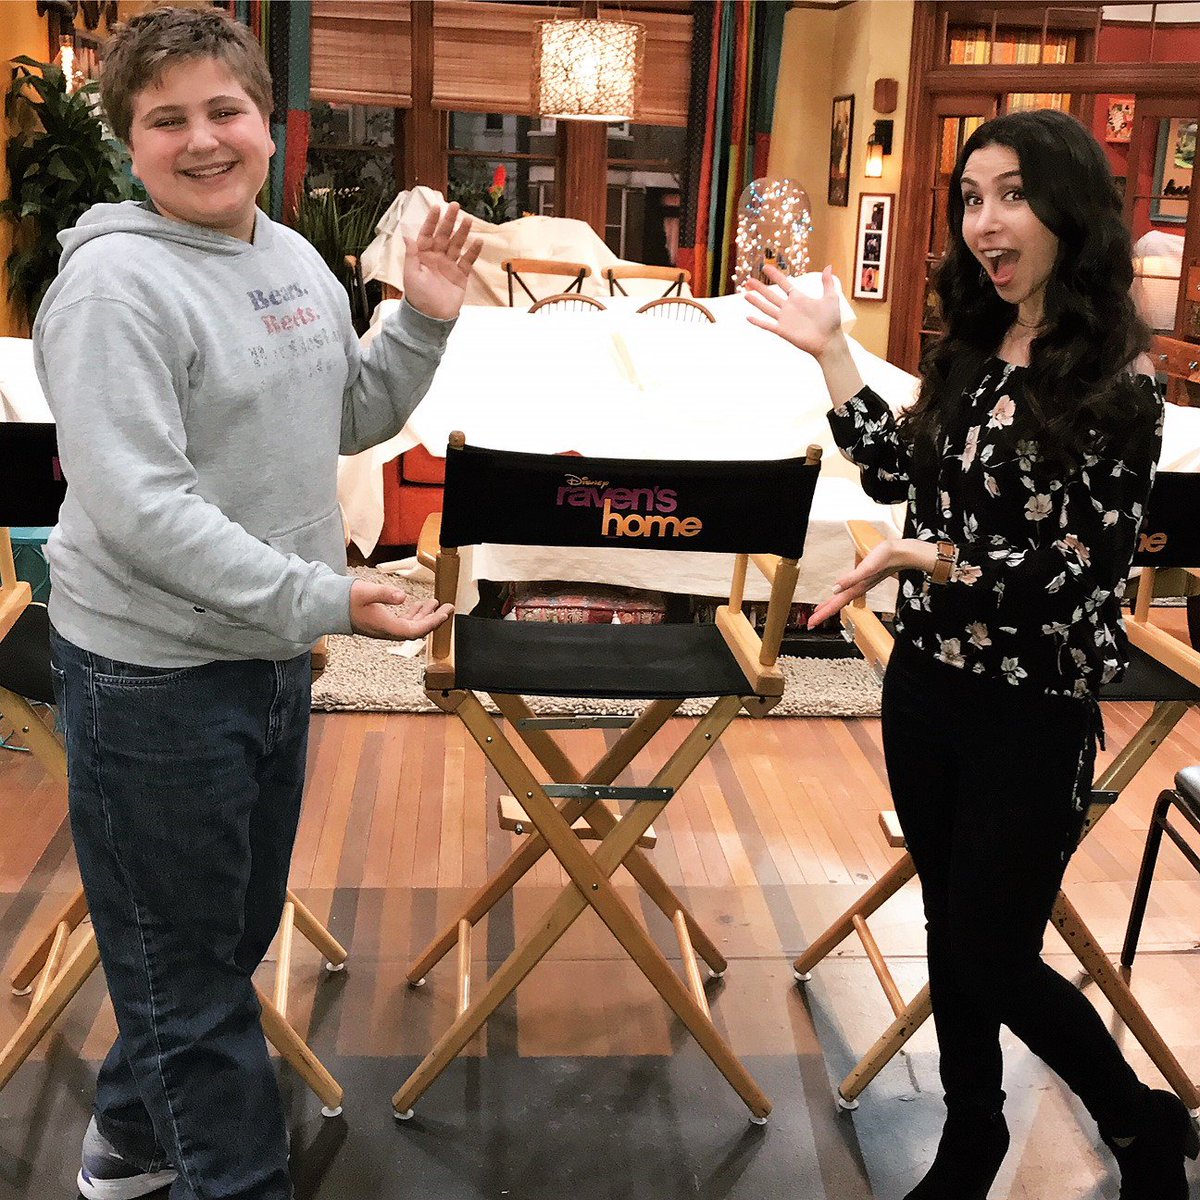 Had a blast visiting @N8YBlaiwes on set for @RavensHome!!! We're all so proud of you, Nathan! Season 2 premieres on Monday June 25th on the Disney Channel! @DisneyChannel #DisneyChannel #RavensHome #Season2 #Youthactor #TV #setvisit #hollywood